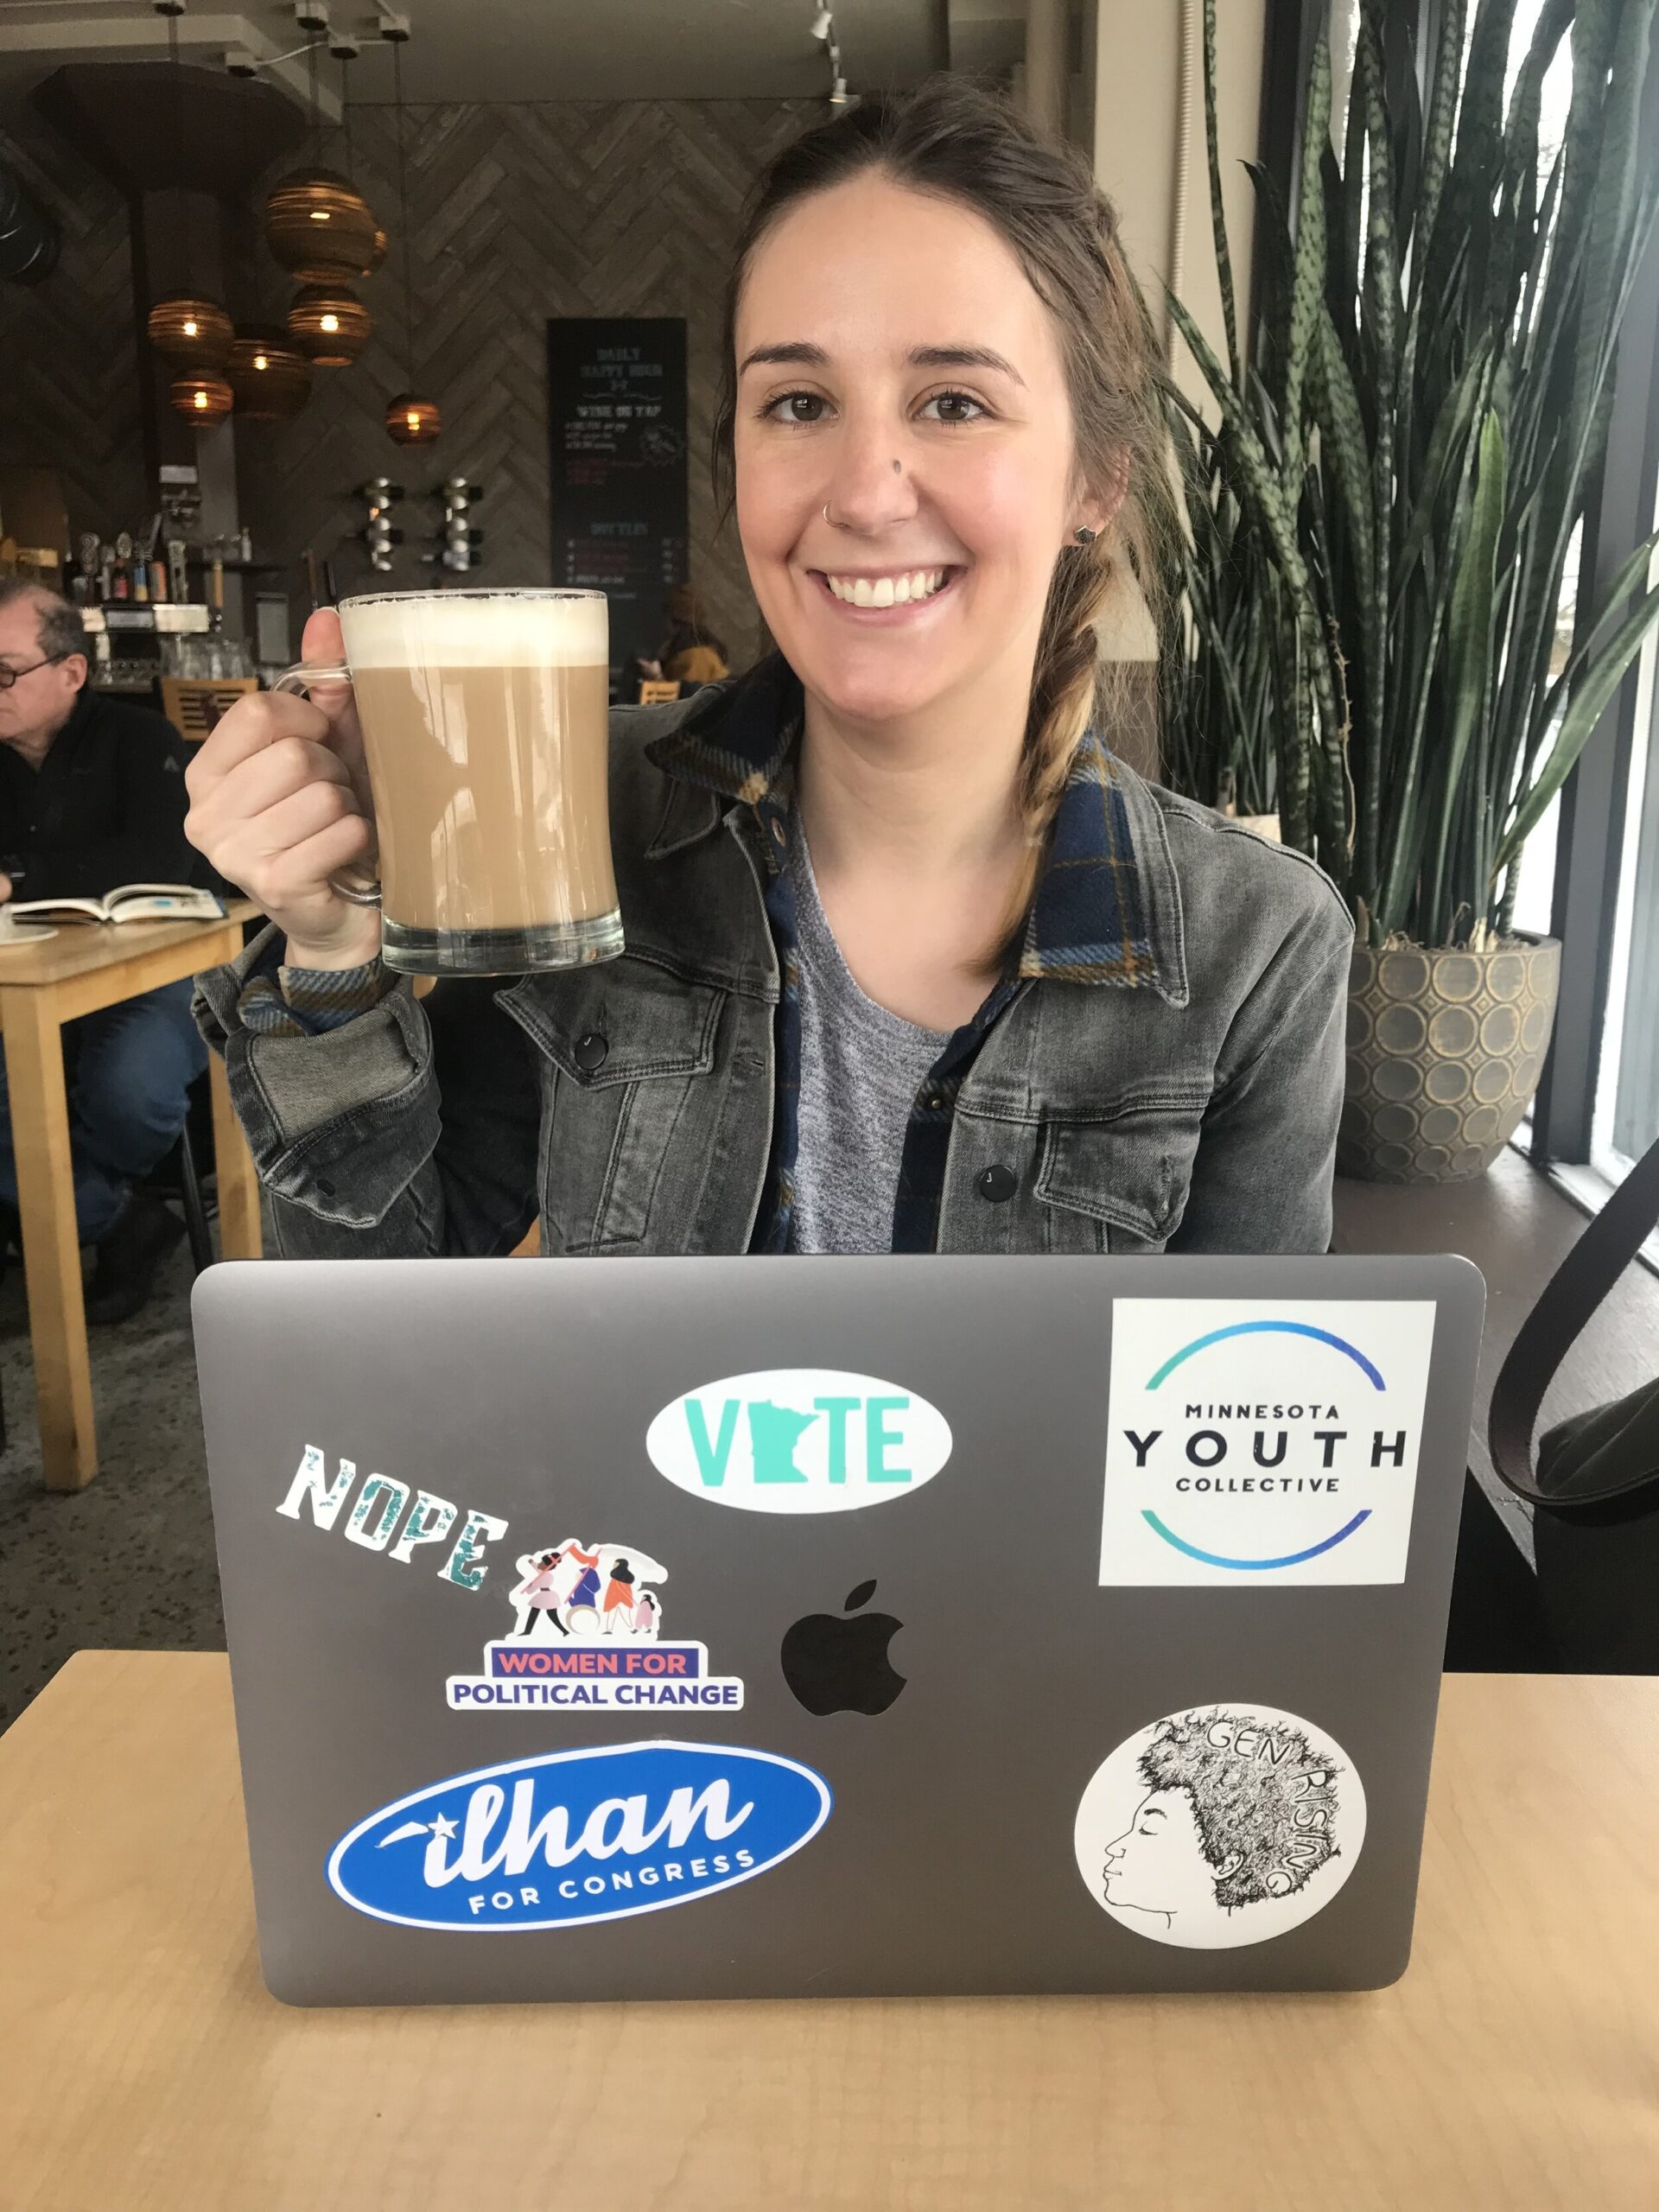 A young woman sits in a cafe, hold a coffee mug and smiles at the camera, a laptop open in front of her